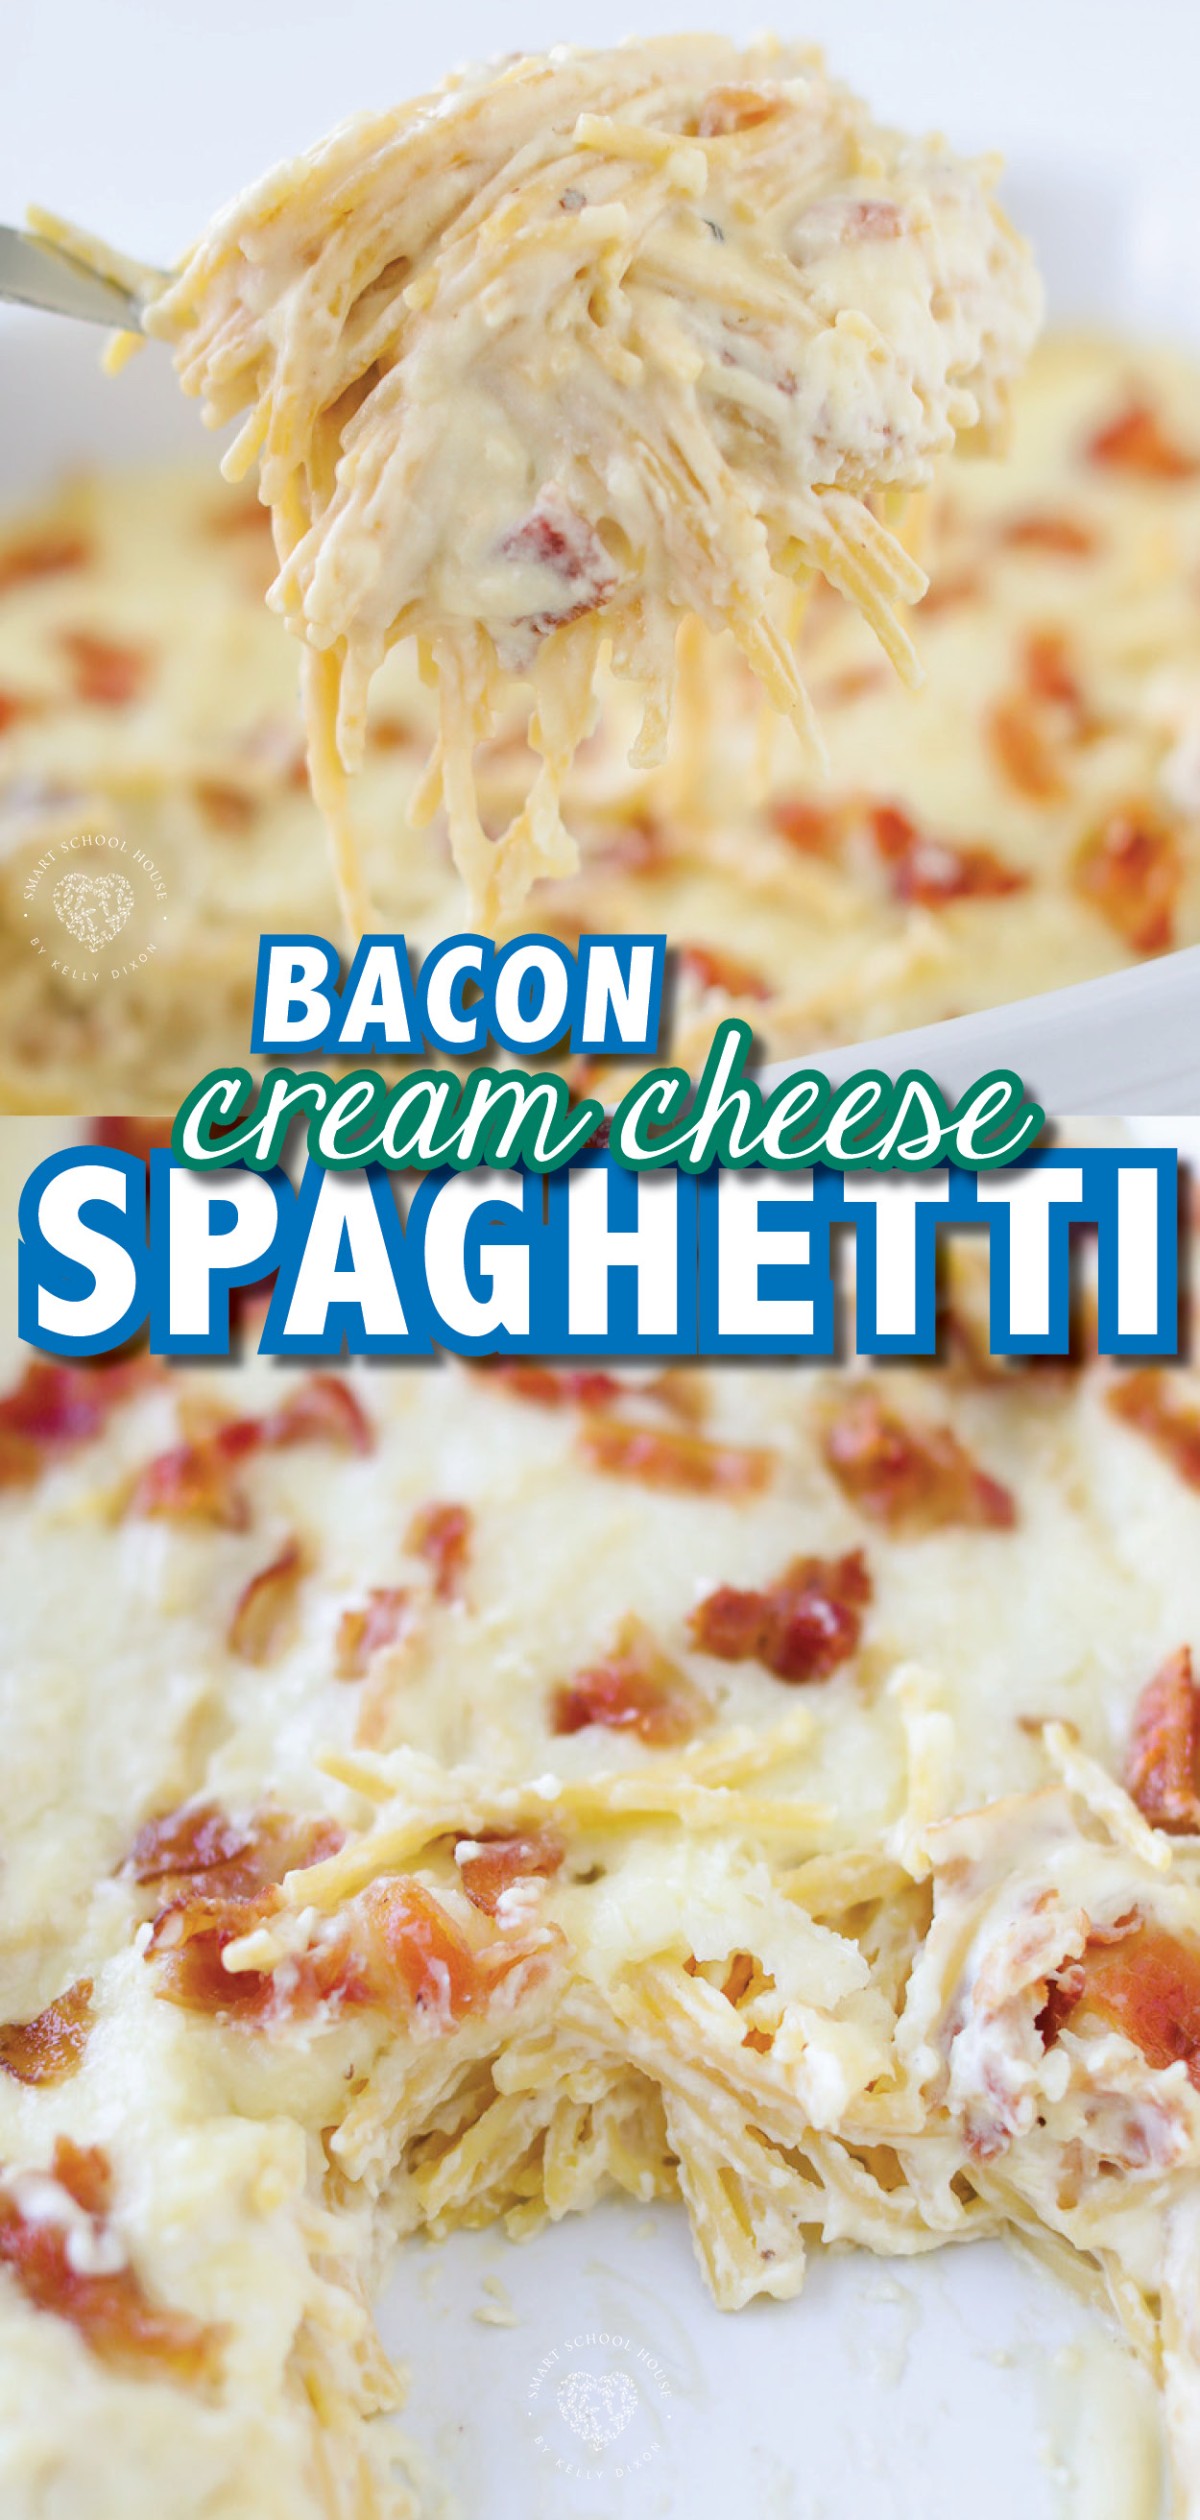 My incredibly rich and decadent Bacon Cream Cheese Spaghetti is a delicious pasta recipe loaded with bacon and an addicting cream cheese sauce! This is a wonderful and filling dinner you can whip up in a breeze. This is creamy, cheesy comfort food right here! 